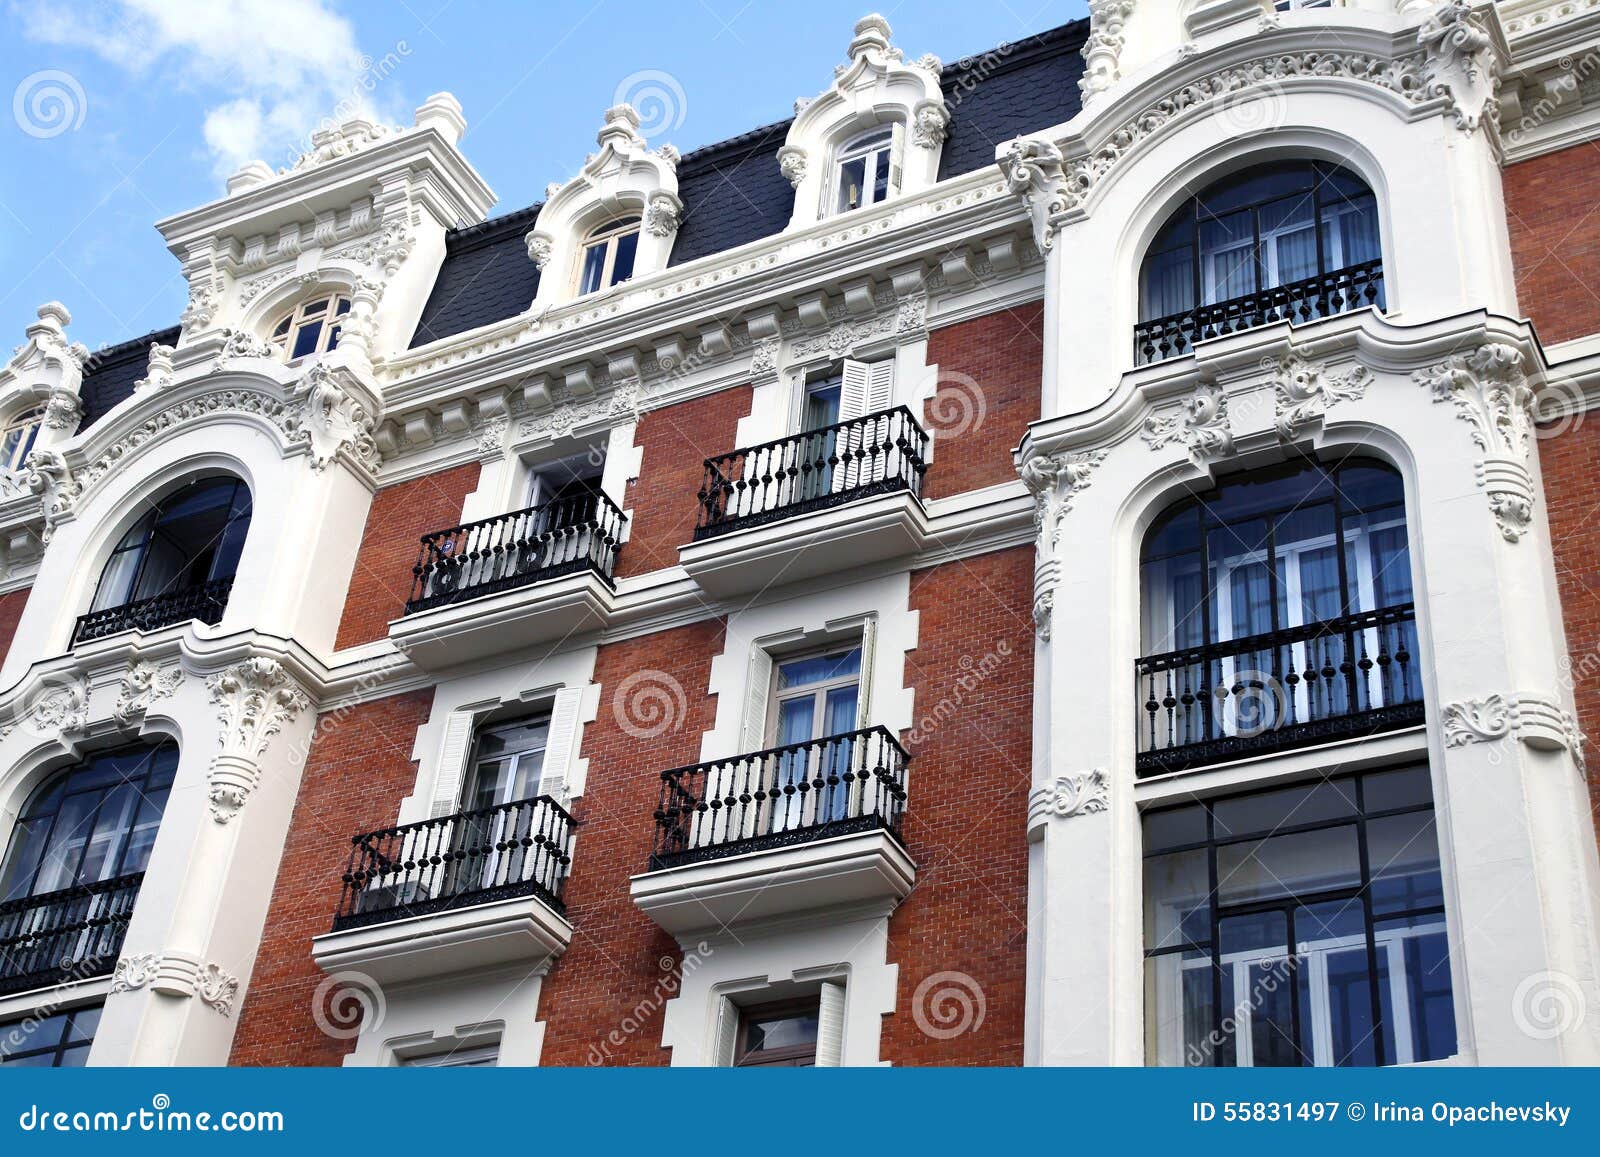 front of the house on gran via in madrid